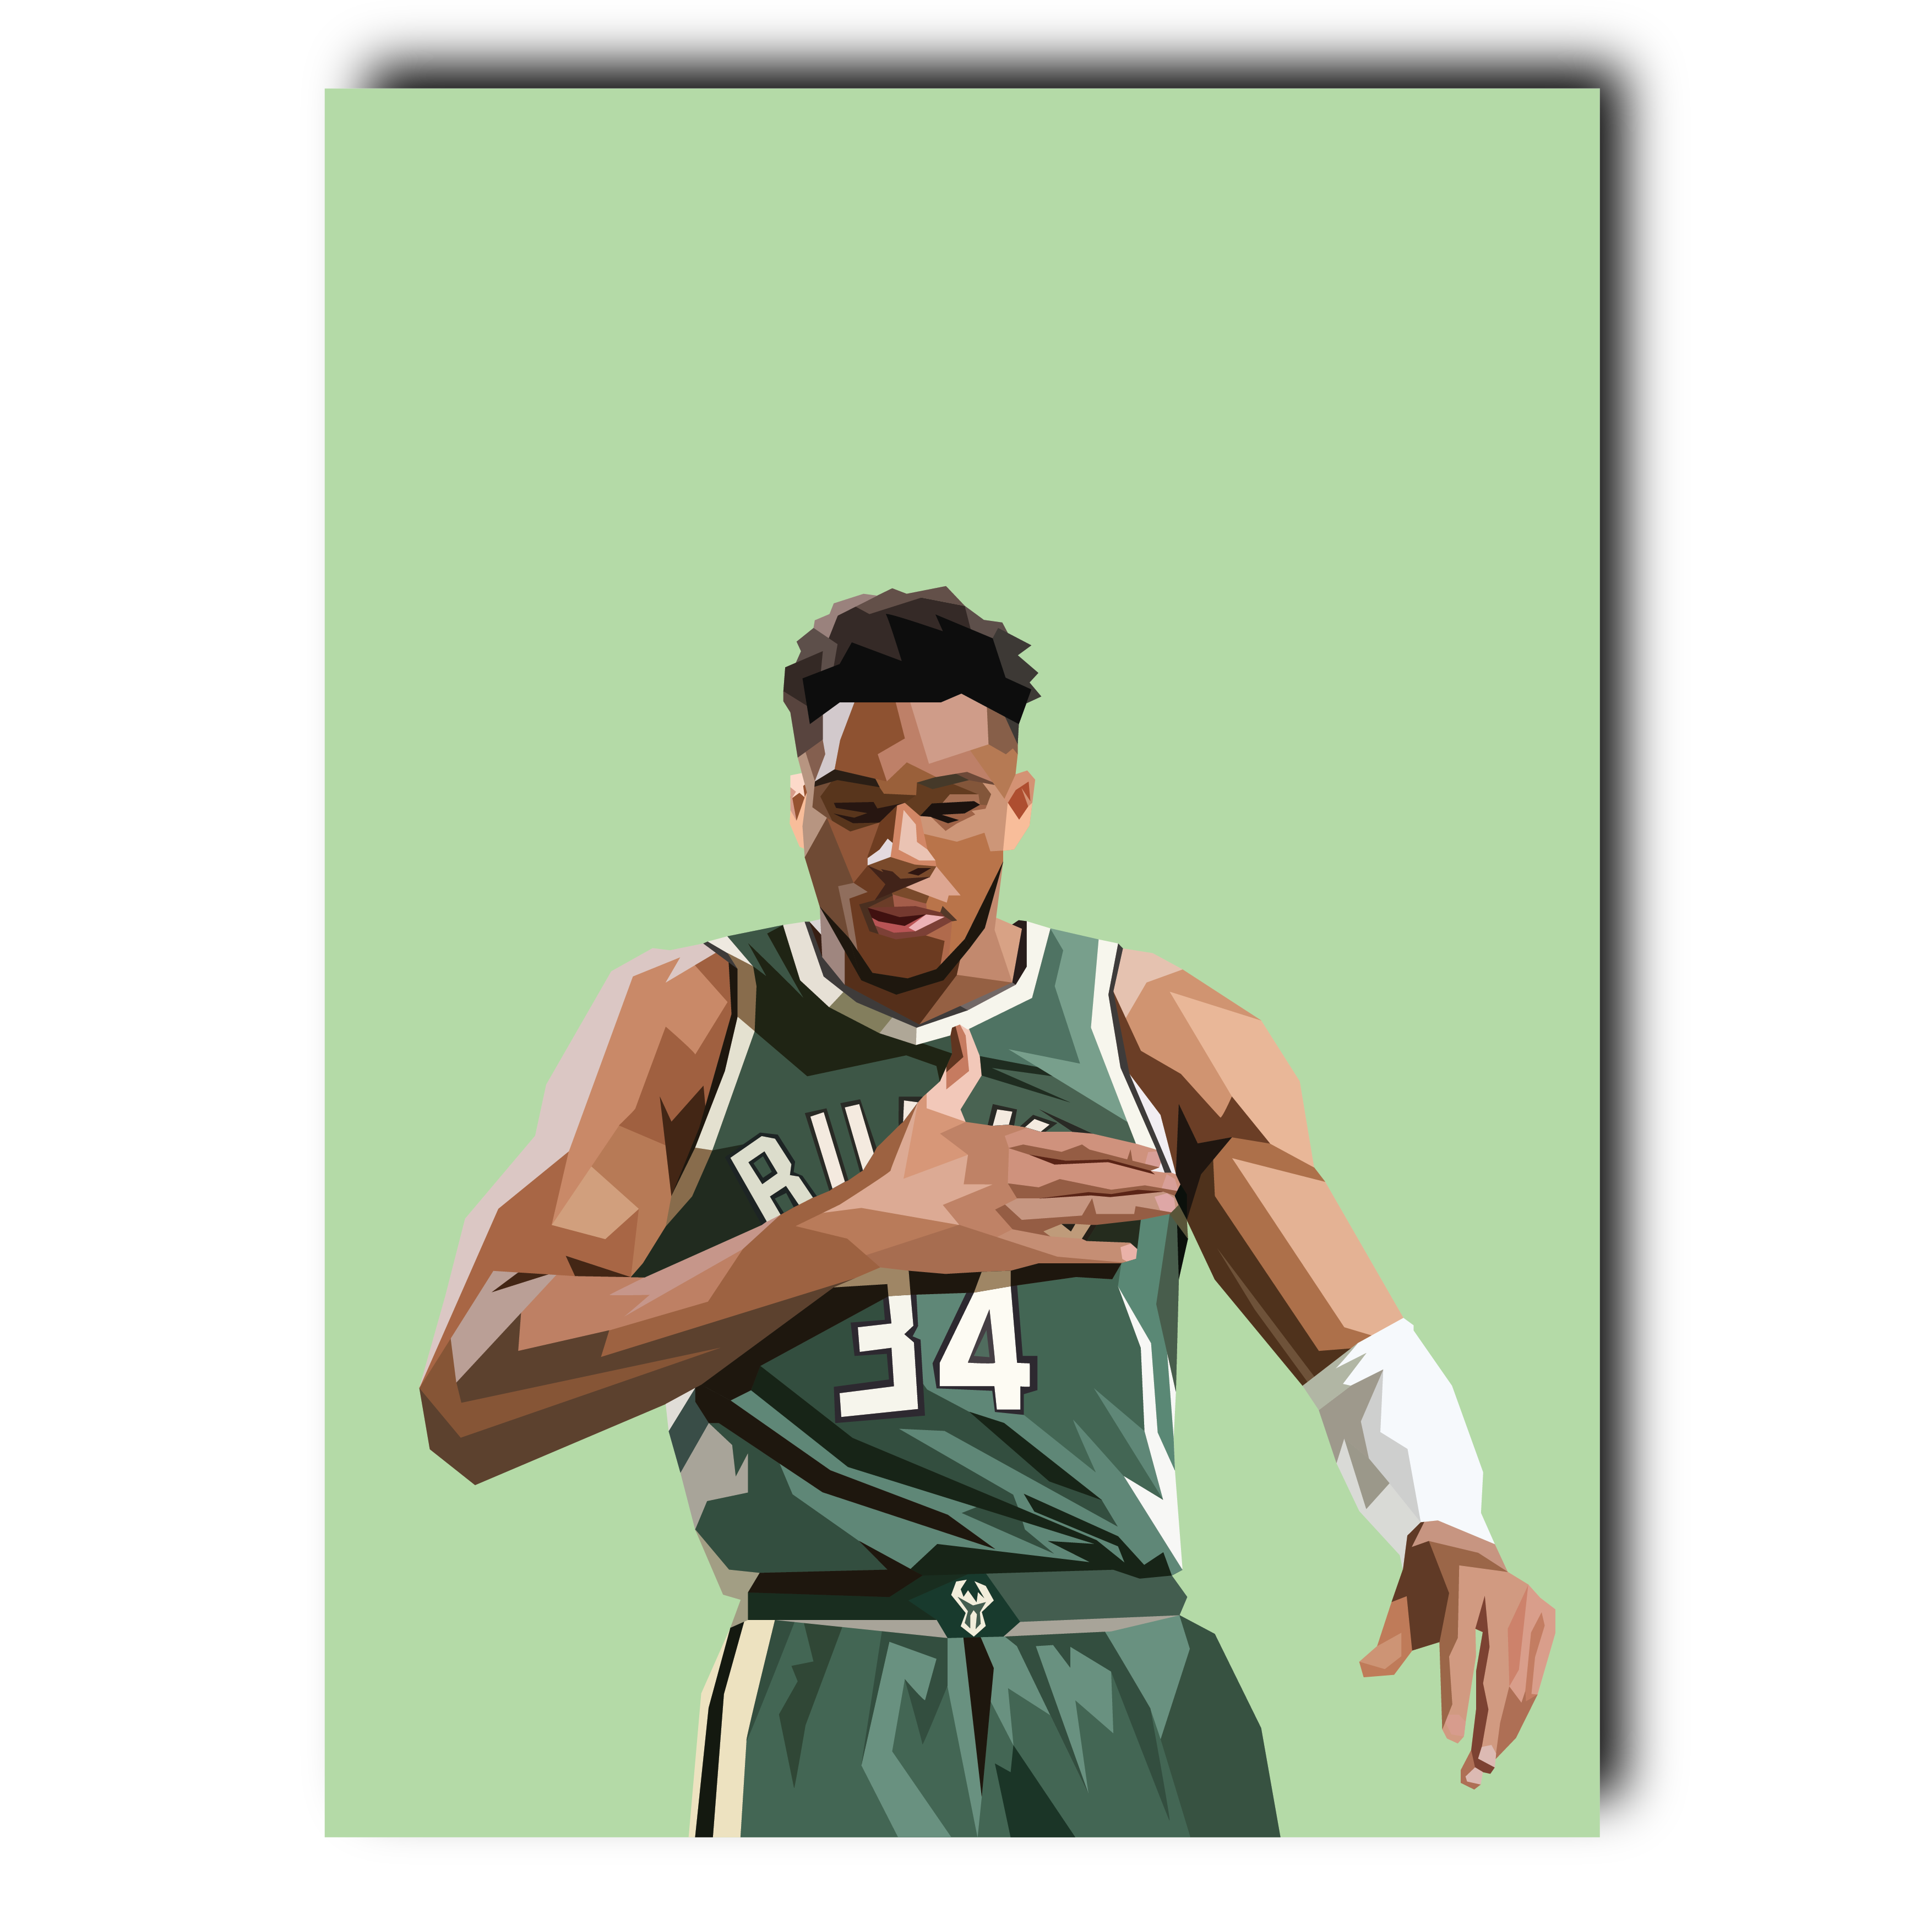 Giannis antetokounmpo on the way to the dunk HD wallpaper download